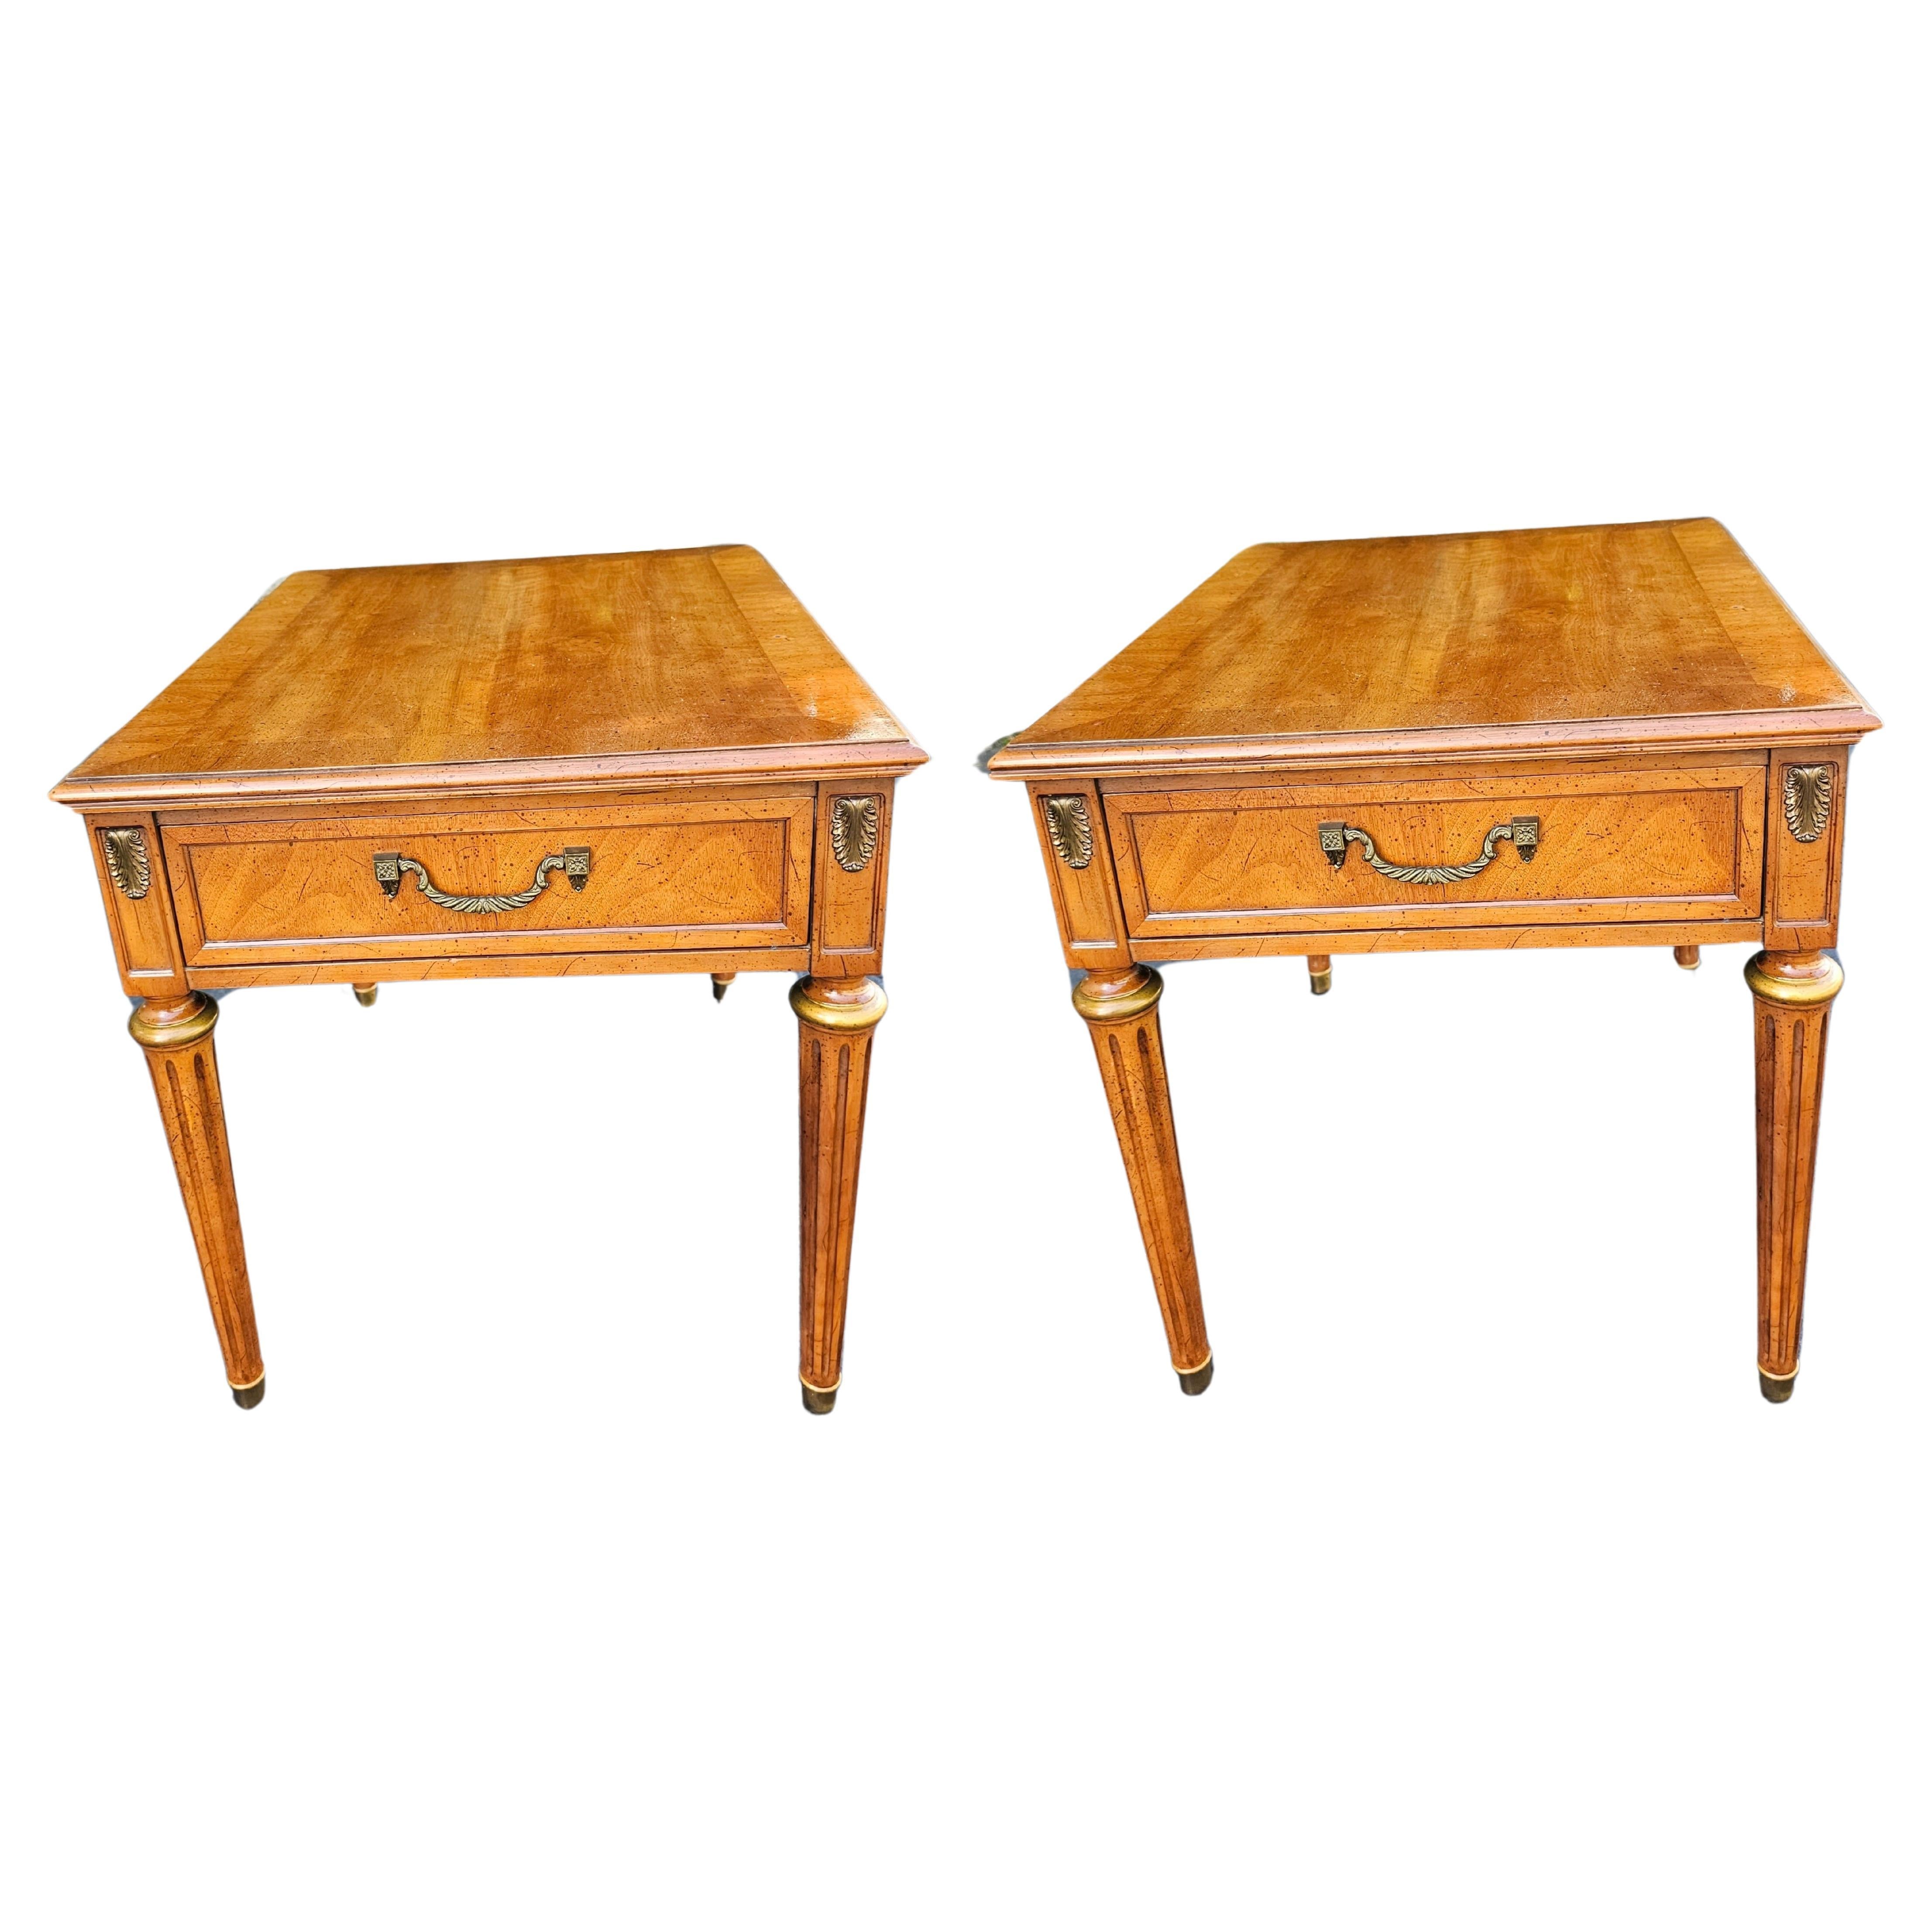 A  pair  of Mid-Century Henredon Fine Furniture Parcel Gilt Fruitwood & Brass Mount single drawer Tables.
measure 